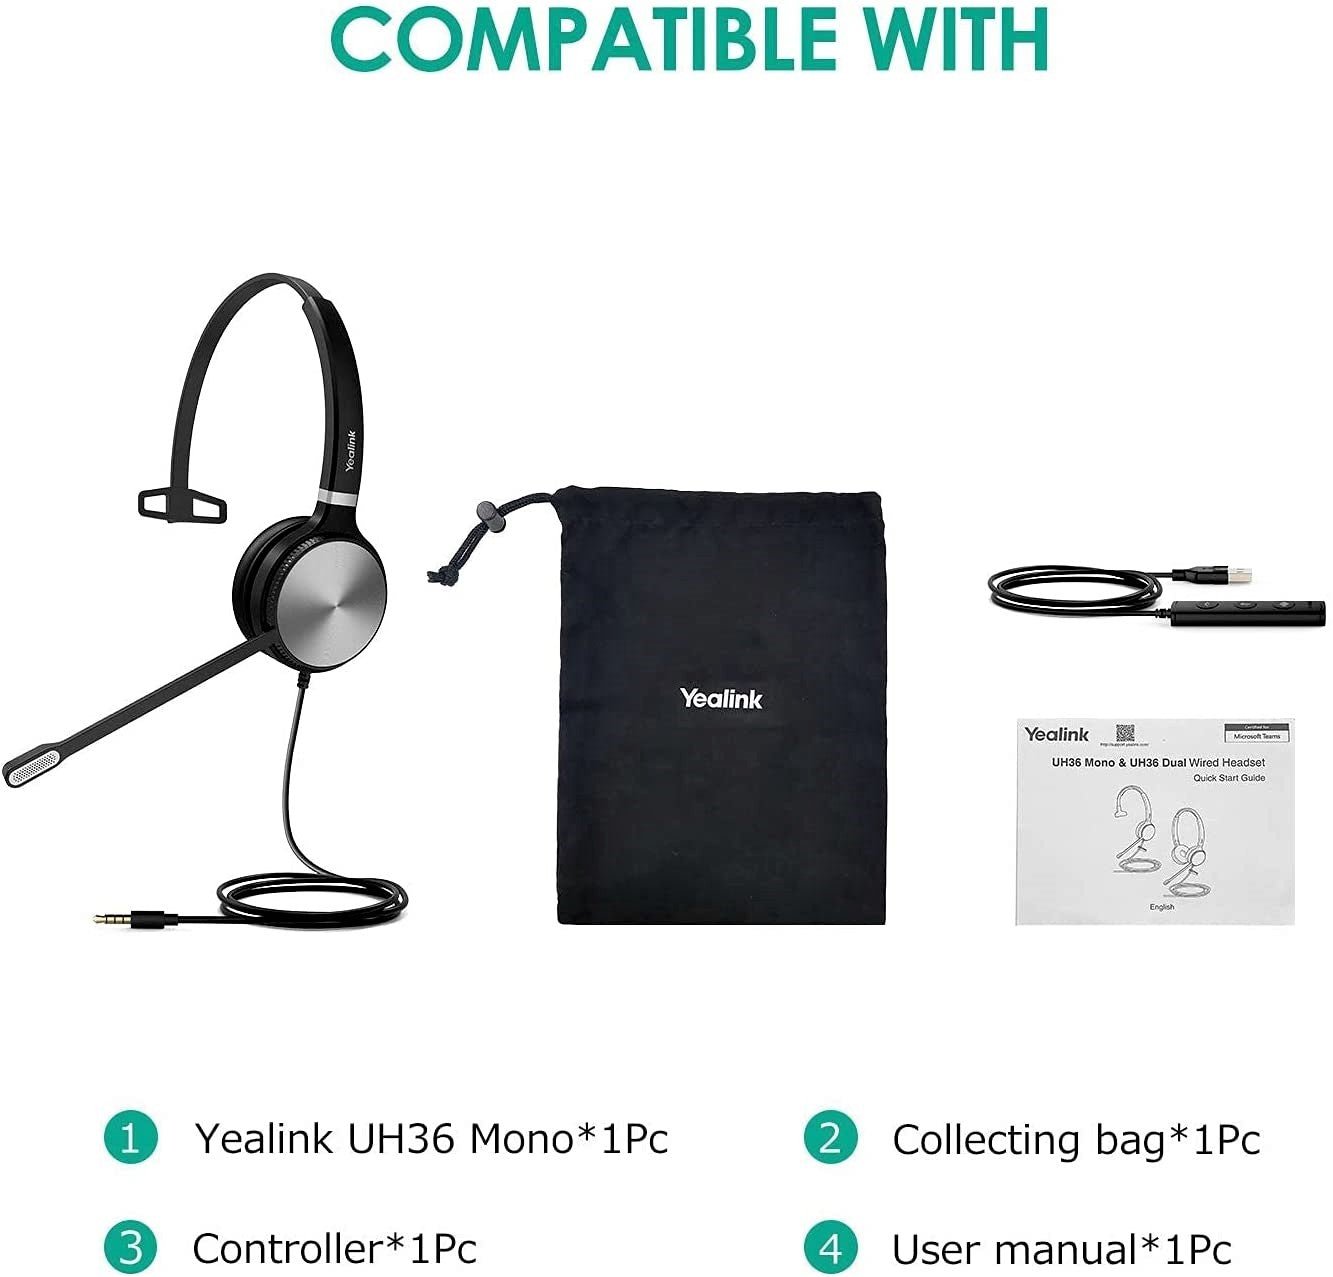 Yealink UH36 Mono USB-A Wired Headset - Features